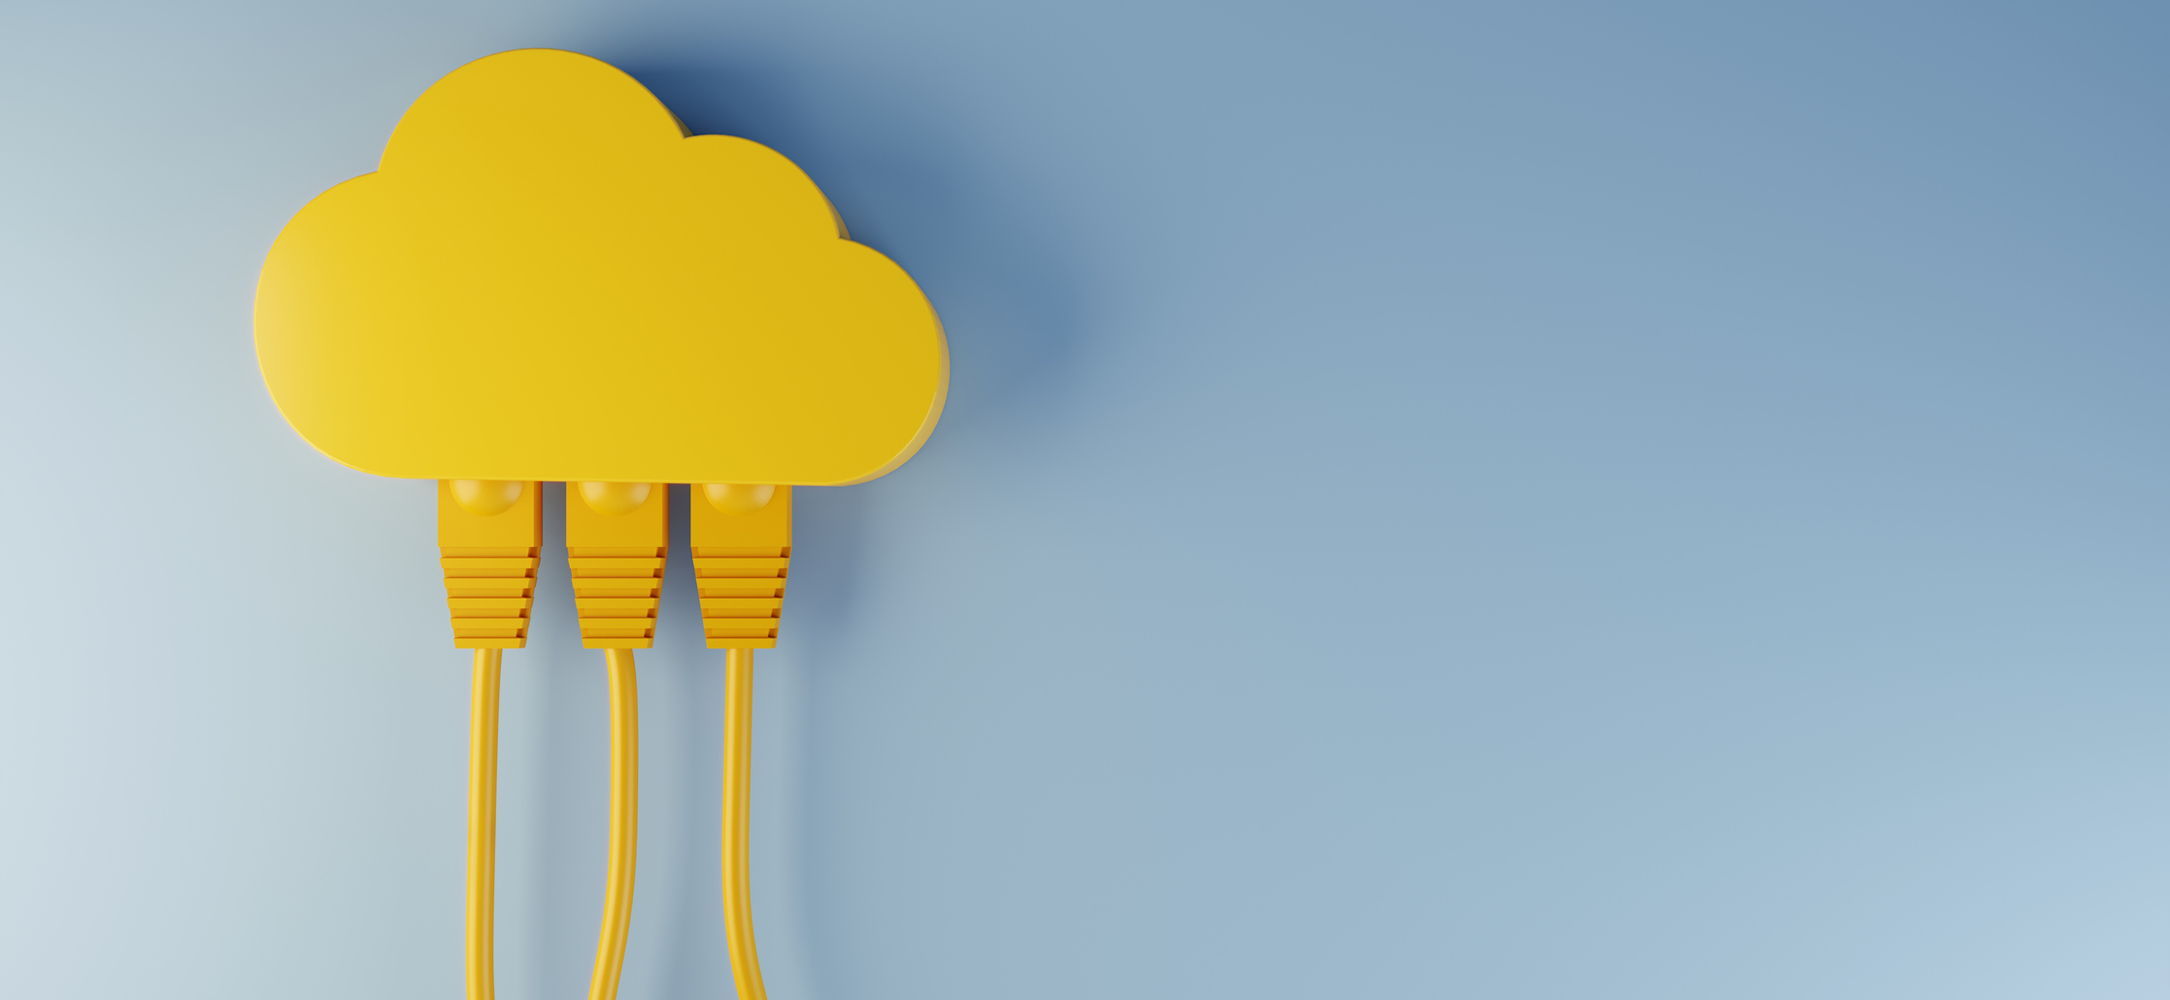 Yellow illustrative cloud with three wires coming out of it on a blue background, representing cloud software integrations.